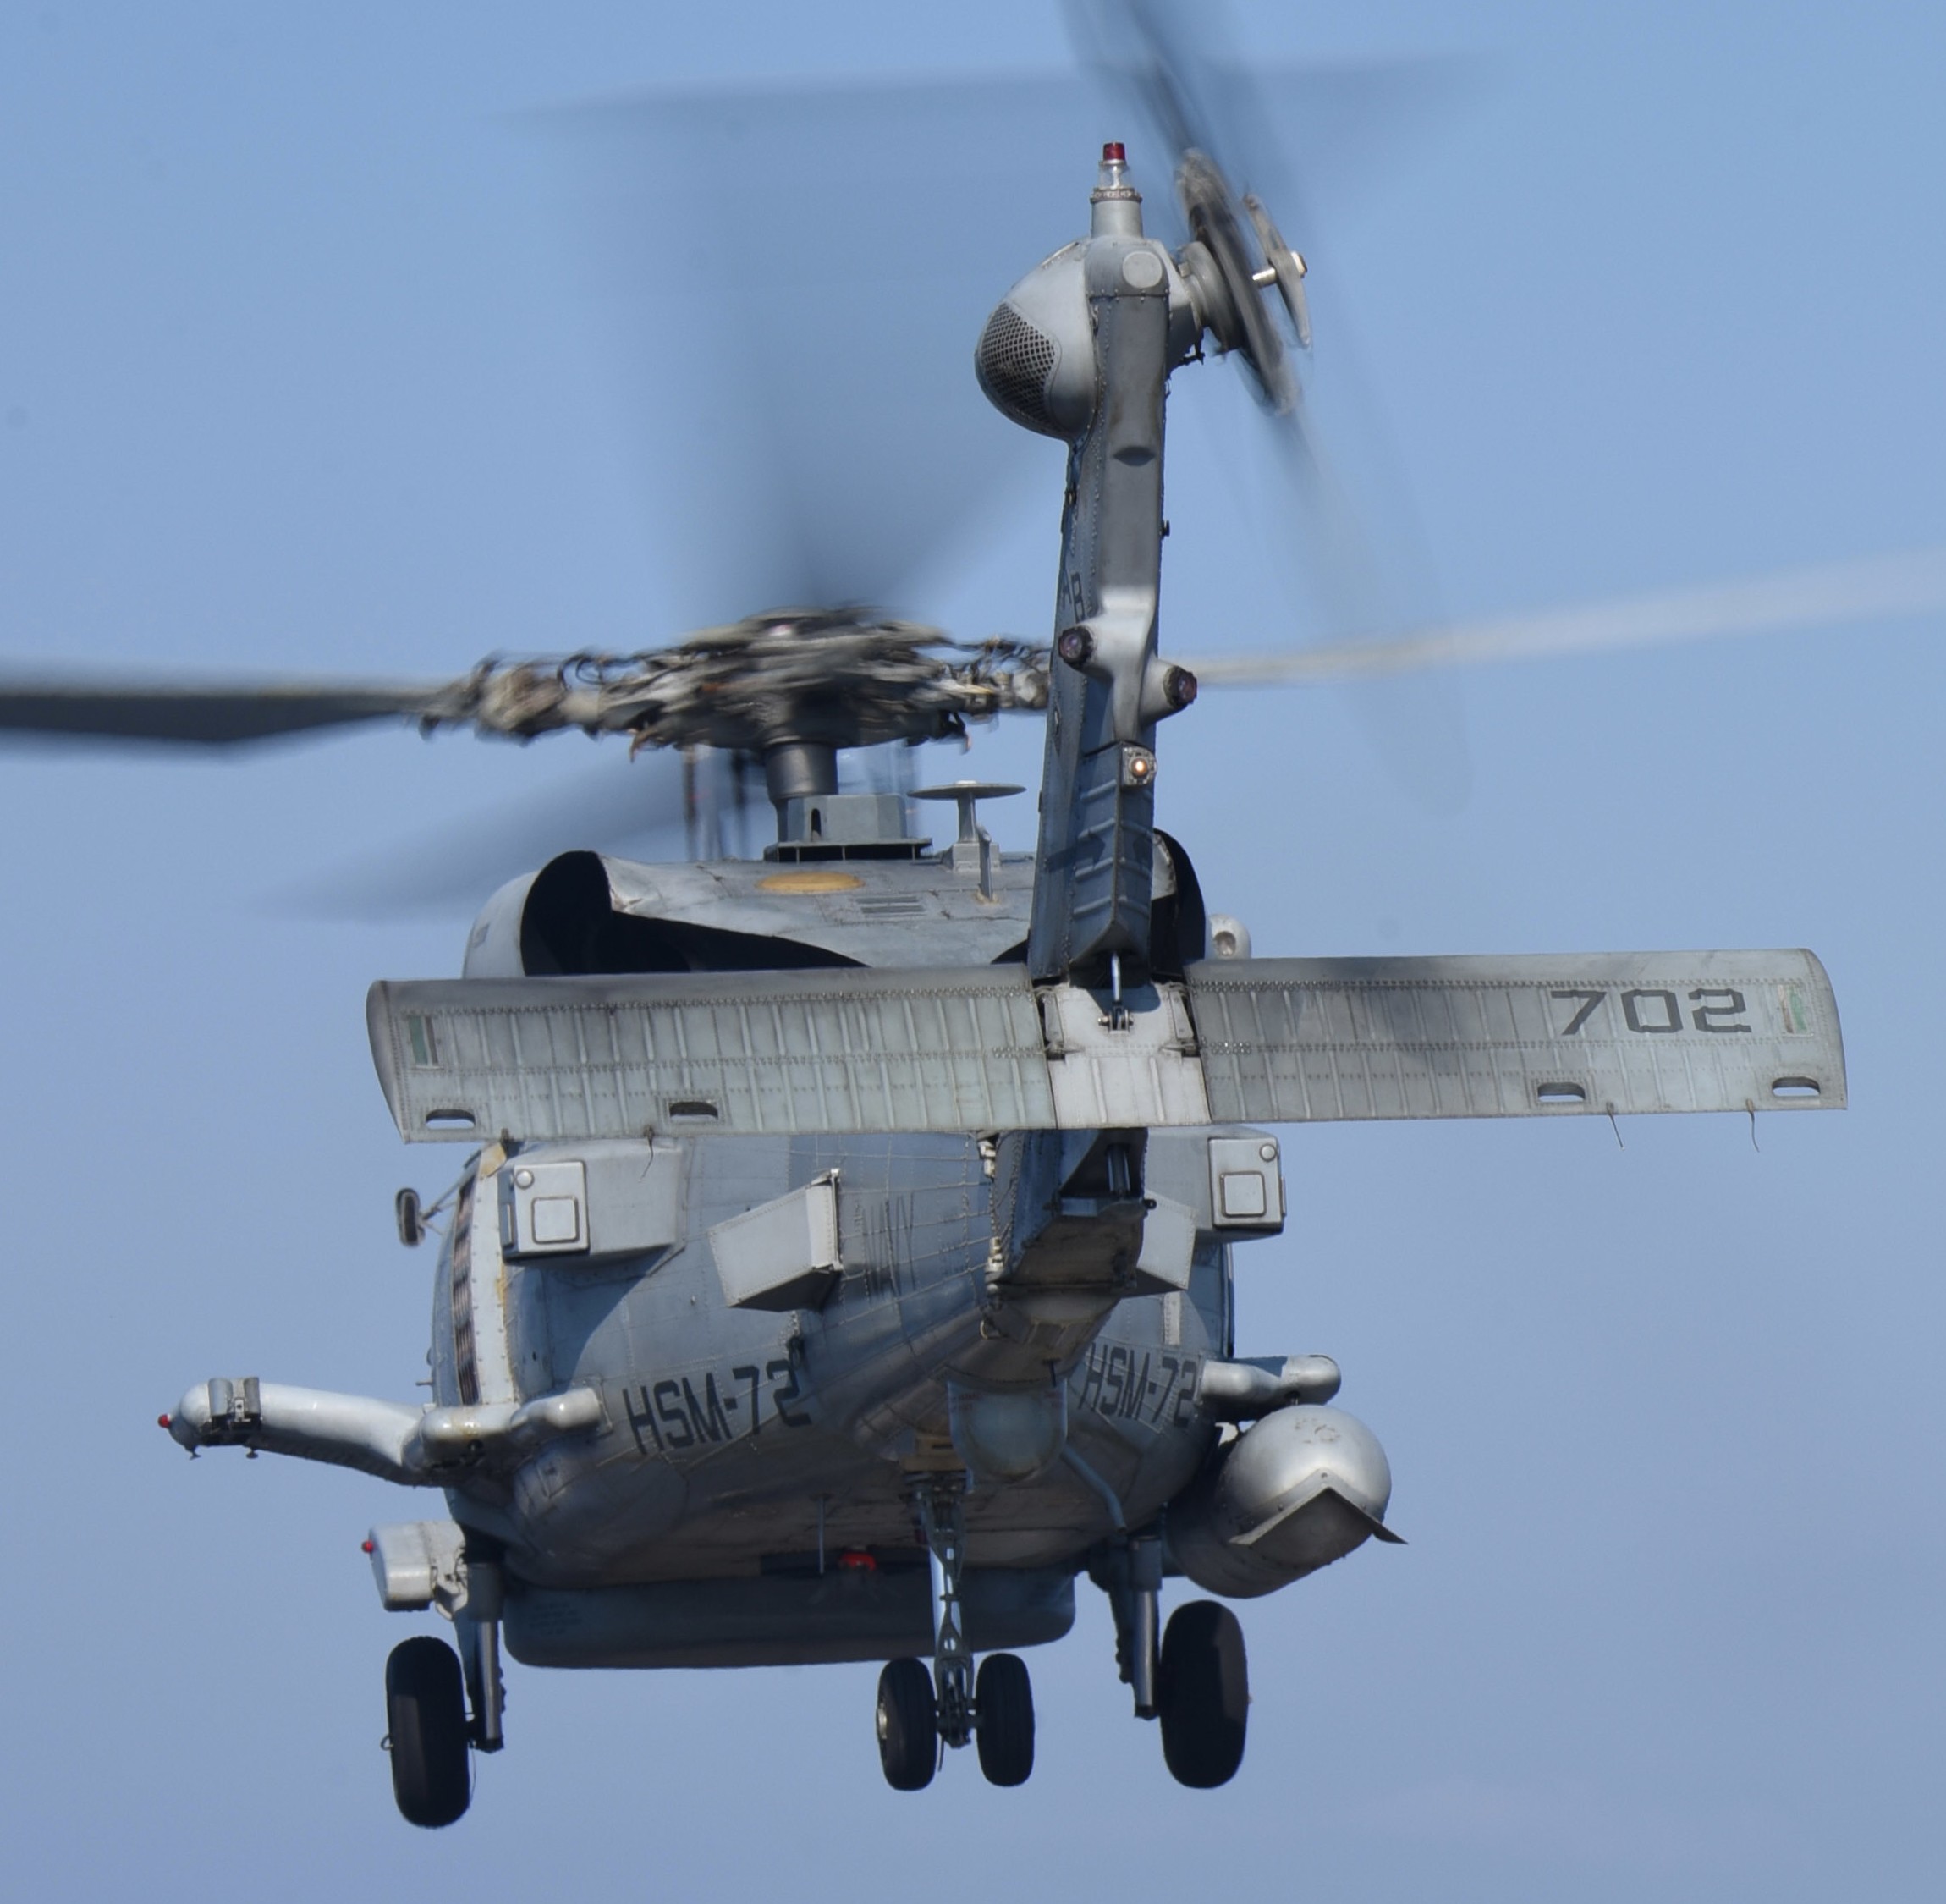 hsm-72 proud warriors helicopter maritime strike squadron us navy mh-60r seahawk 2016 18